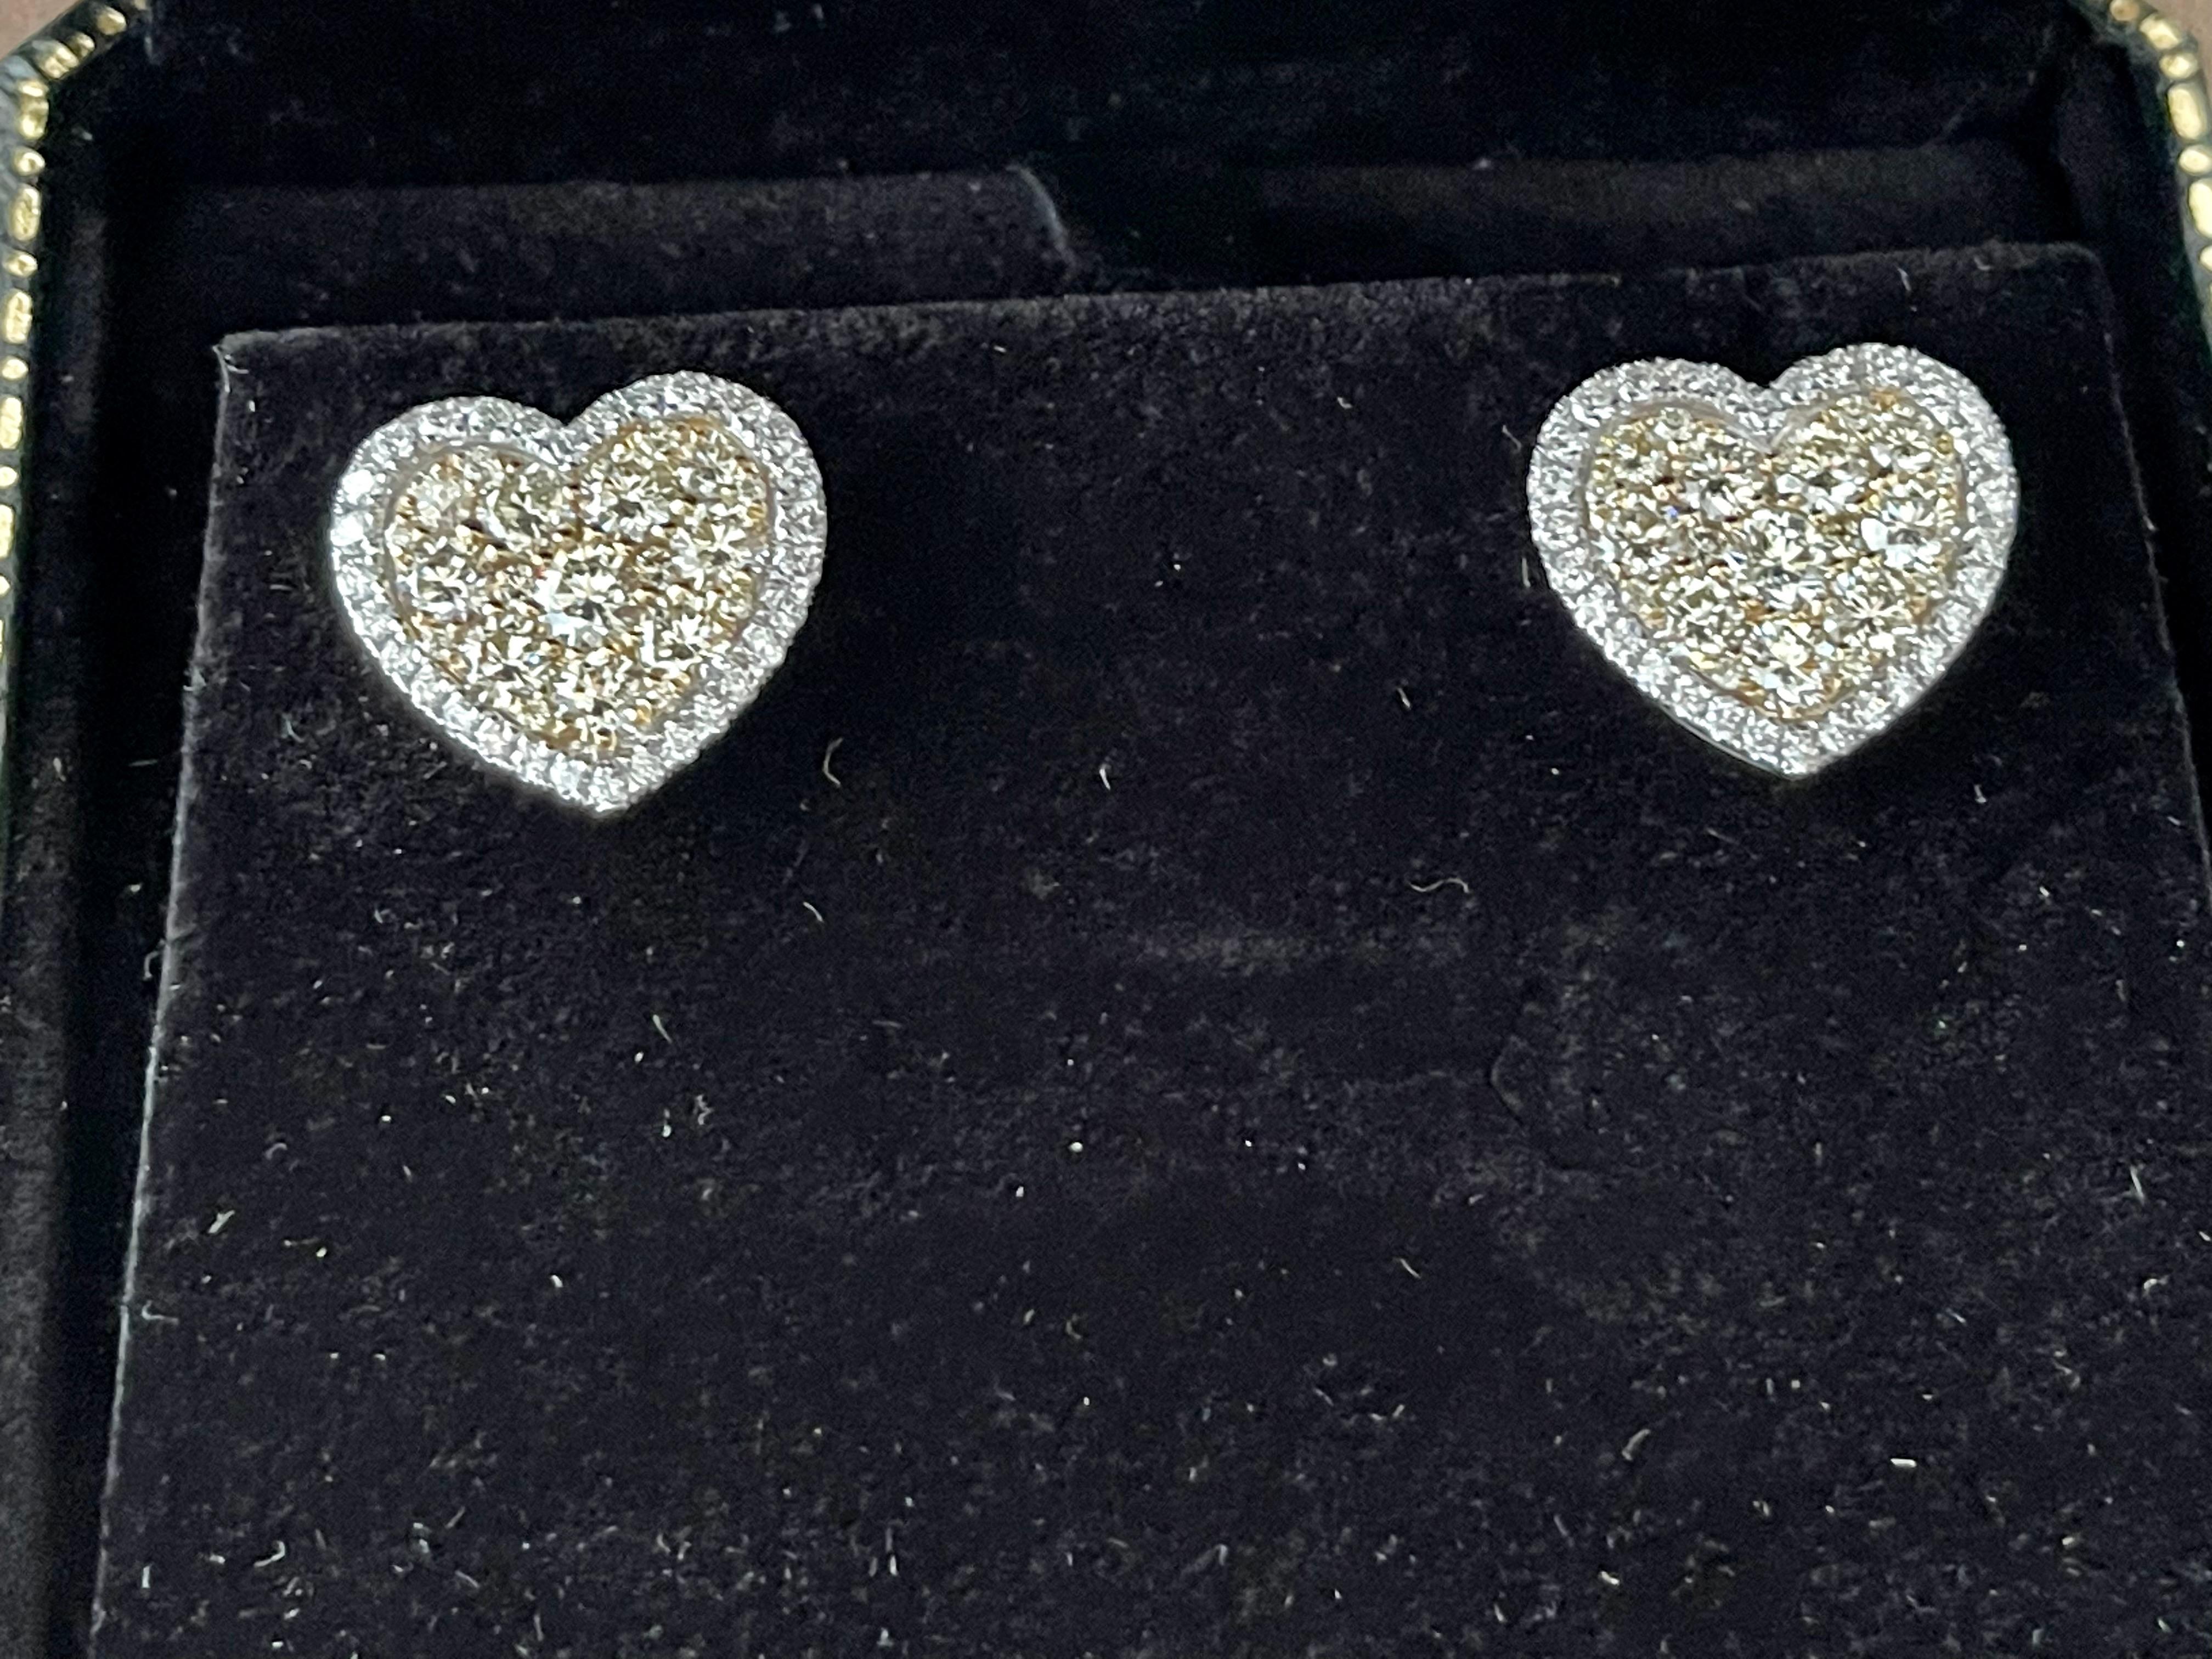 14 K Yelllow and White Gold 3.86 Total Carat Heart Shaped Earrings For Sale 6